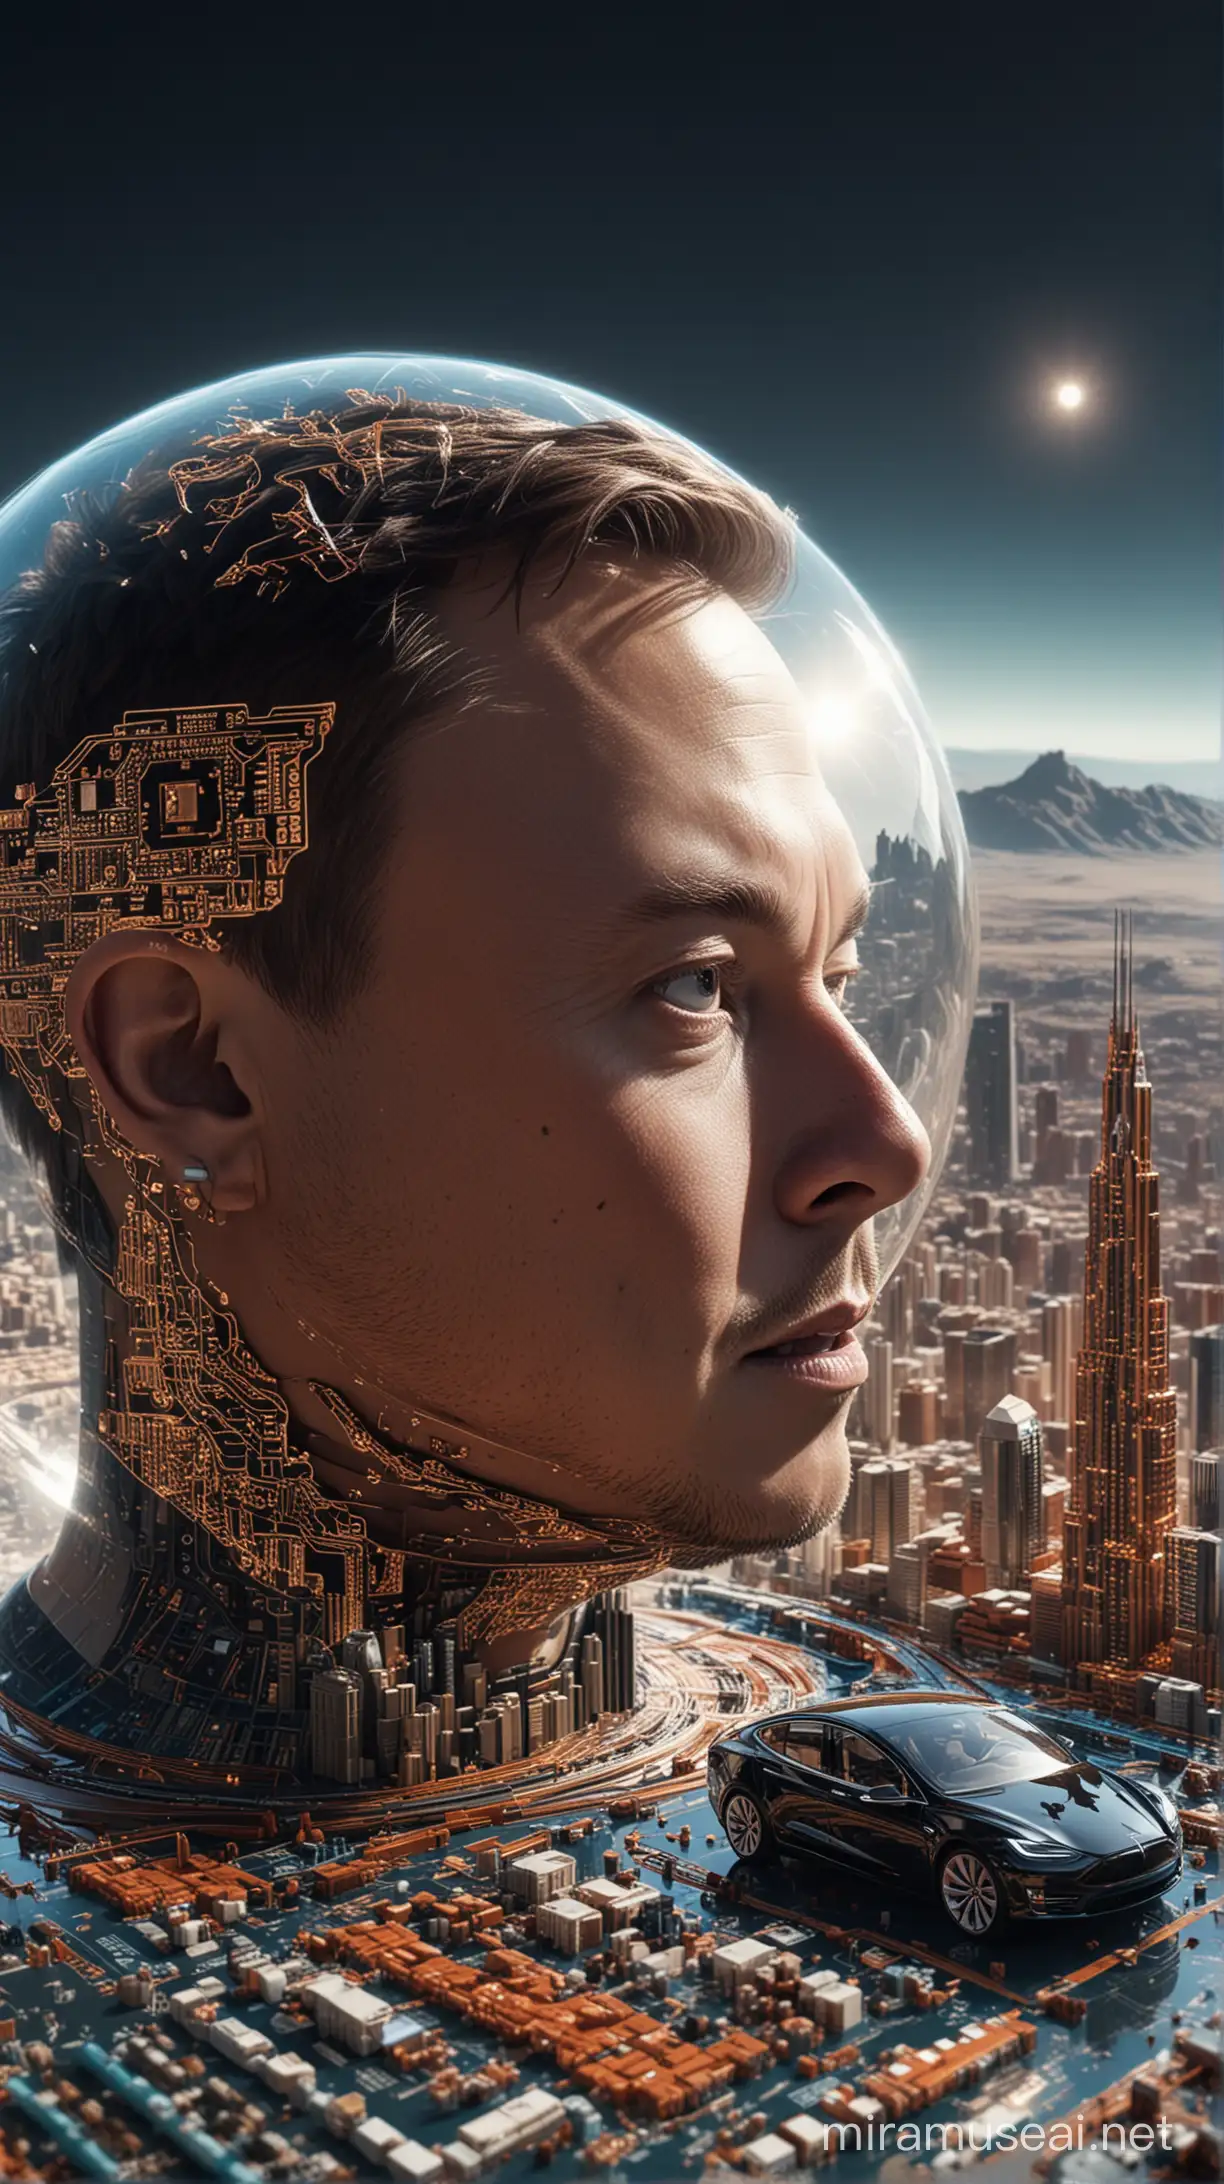 
Elon Musk. Photorealistic headshot, with a faint glow. Left side: Blueprint of a Tesla car merging into a circuit board. Right side: Transparent Mars globe with a futuristic city peeking out. Center: Code strands forming a dollar sign with a brain icon in the middle. Design style: Art Deco.